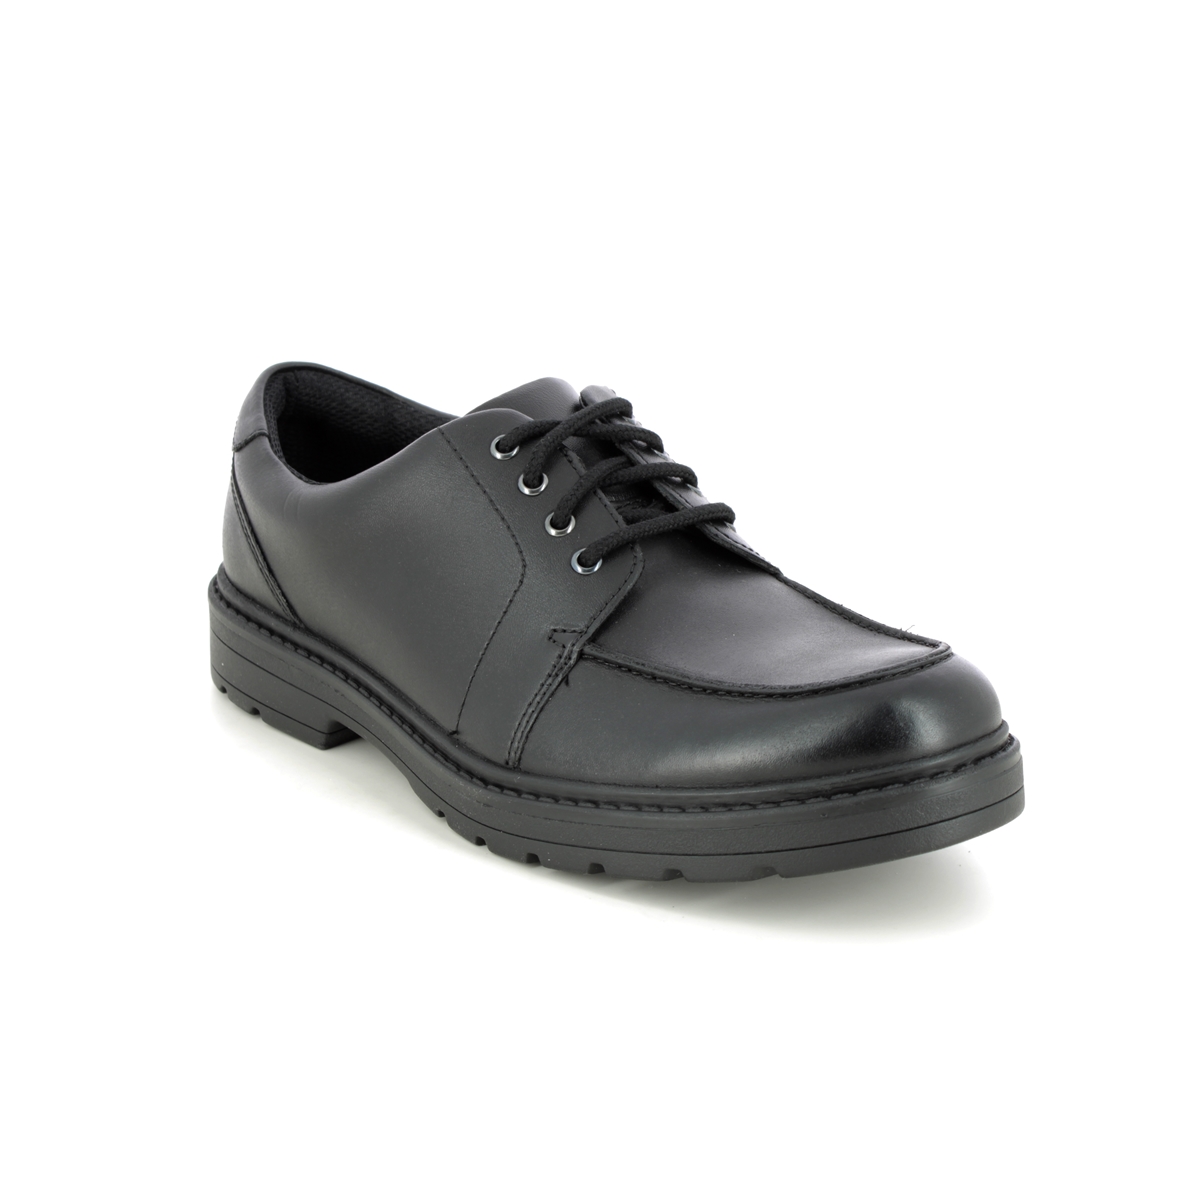 Clarks Loxham Pace Y Black Kids Boys Shoes 515926F In Size 6.5 In Plain Black F Width Fitting Regular Fit For School For kids